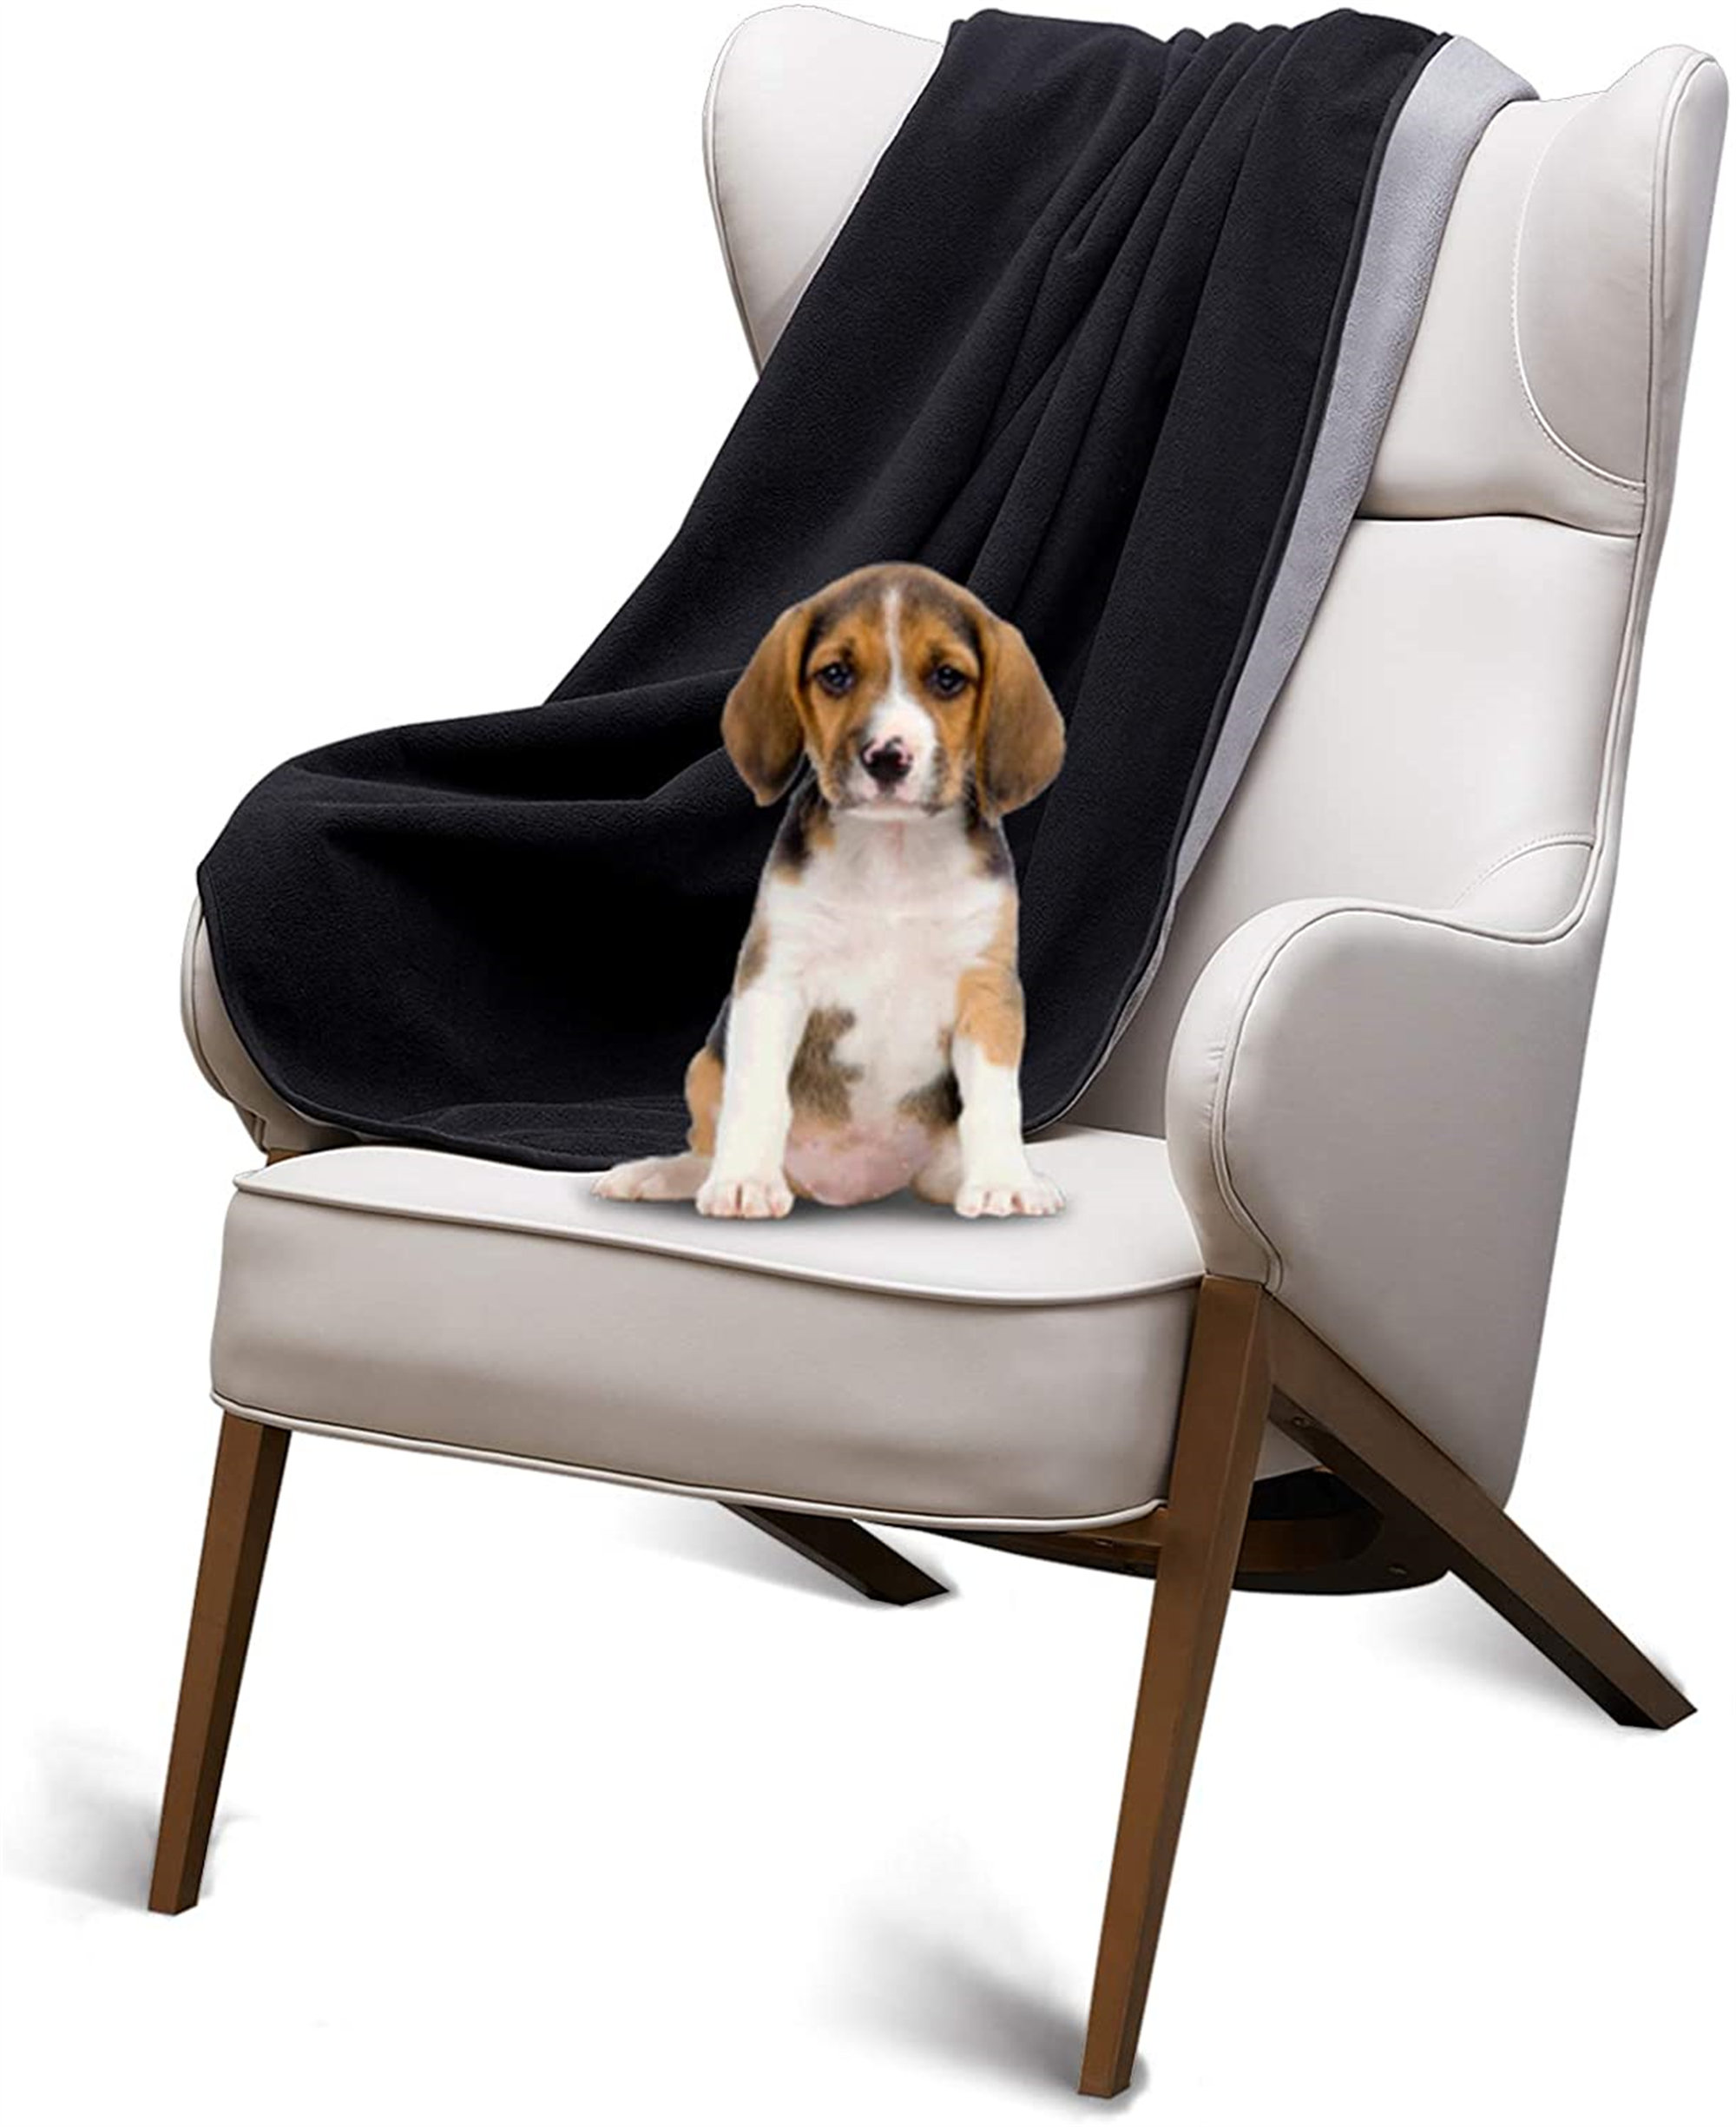 A Beagle Dog for Beagle Lovers Premium Quality Sherpa Fleece Throw Blanket 3D Printed Warm Fluffy Cozy Soft Tv Bed Couch Comfy Microfiber Velvet Plush 